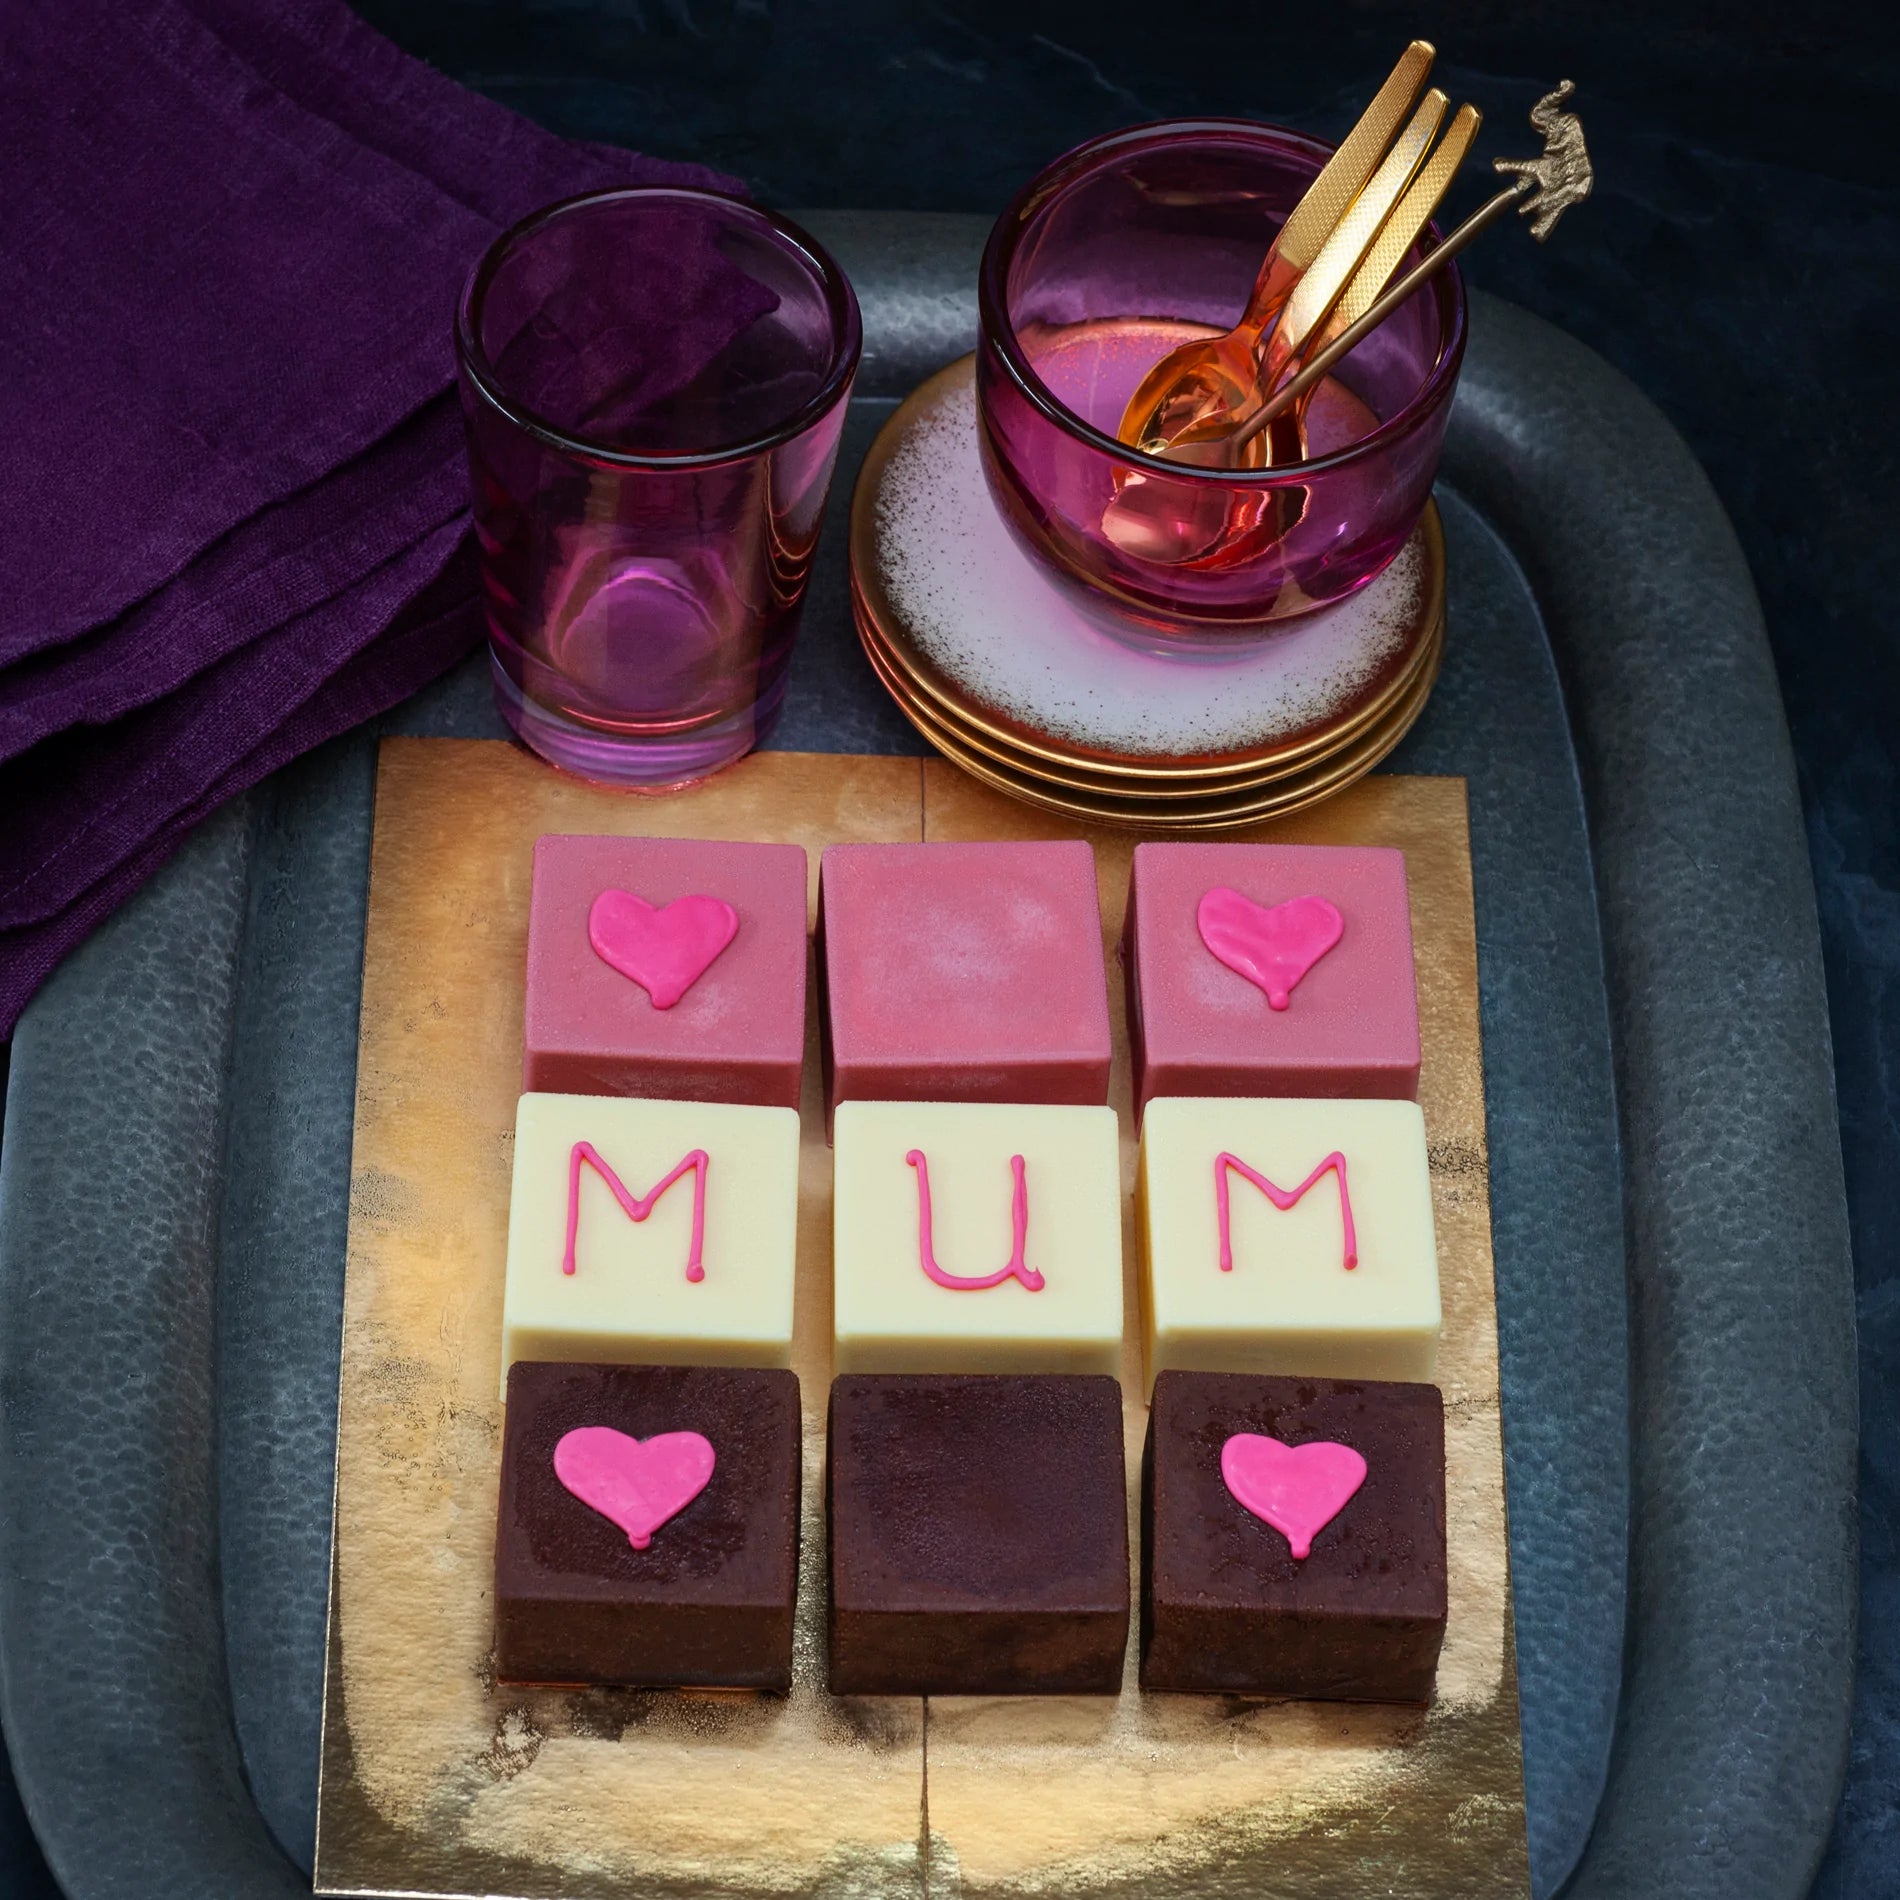 Mini square ice cakes on a tray, 3 covered in ruby chocolate, 3 in white chocolate and 3 in dark chocolate, decorated with hearts and with the word "mum"